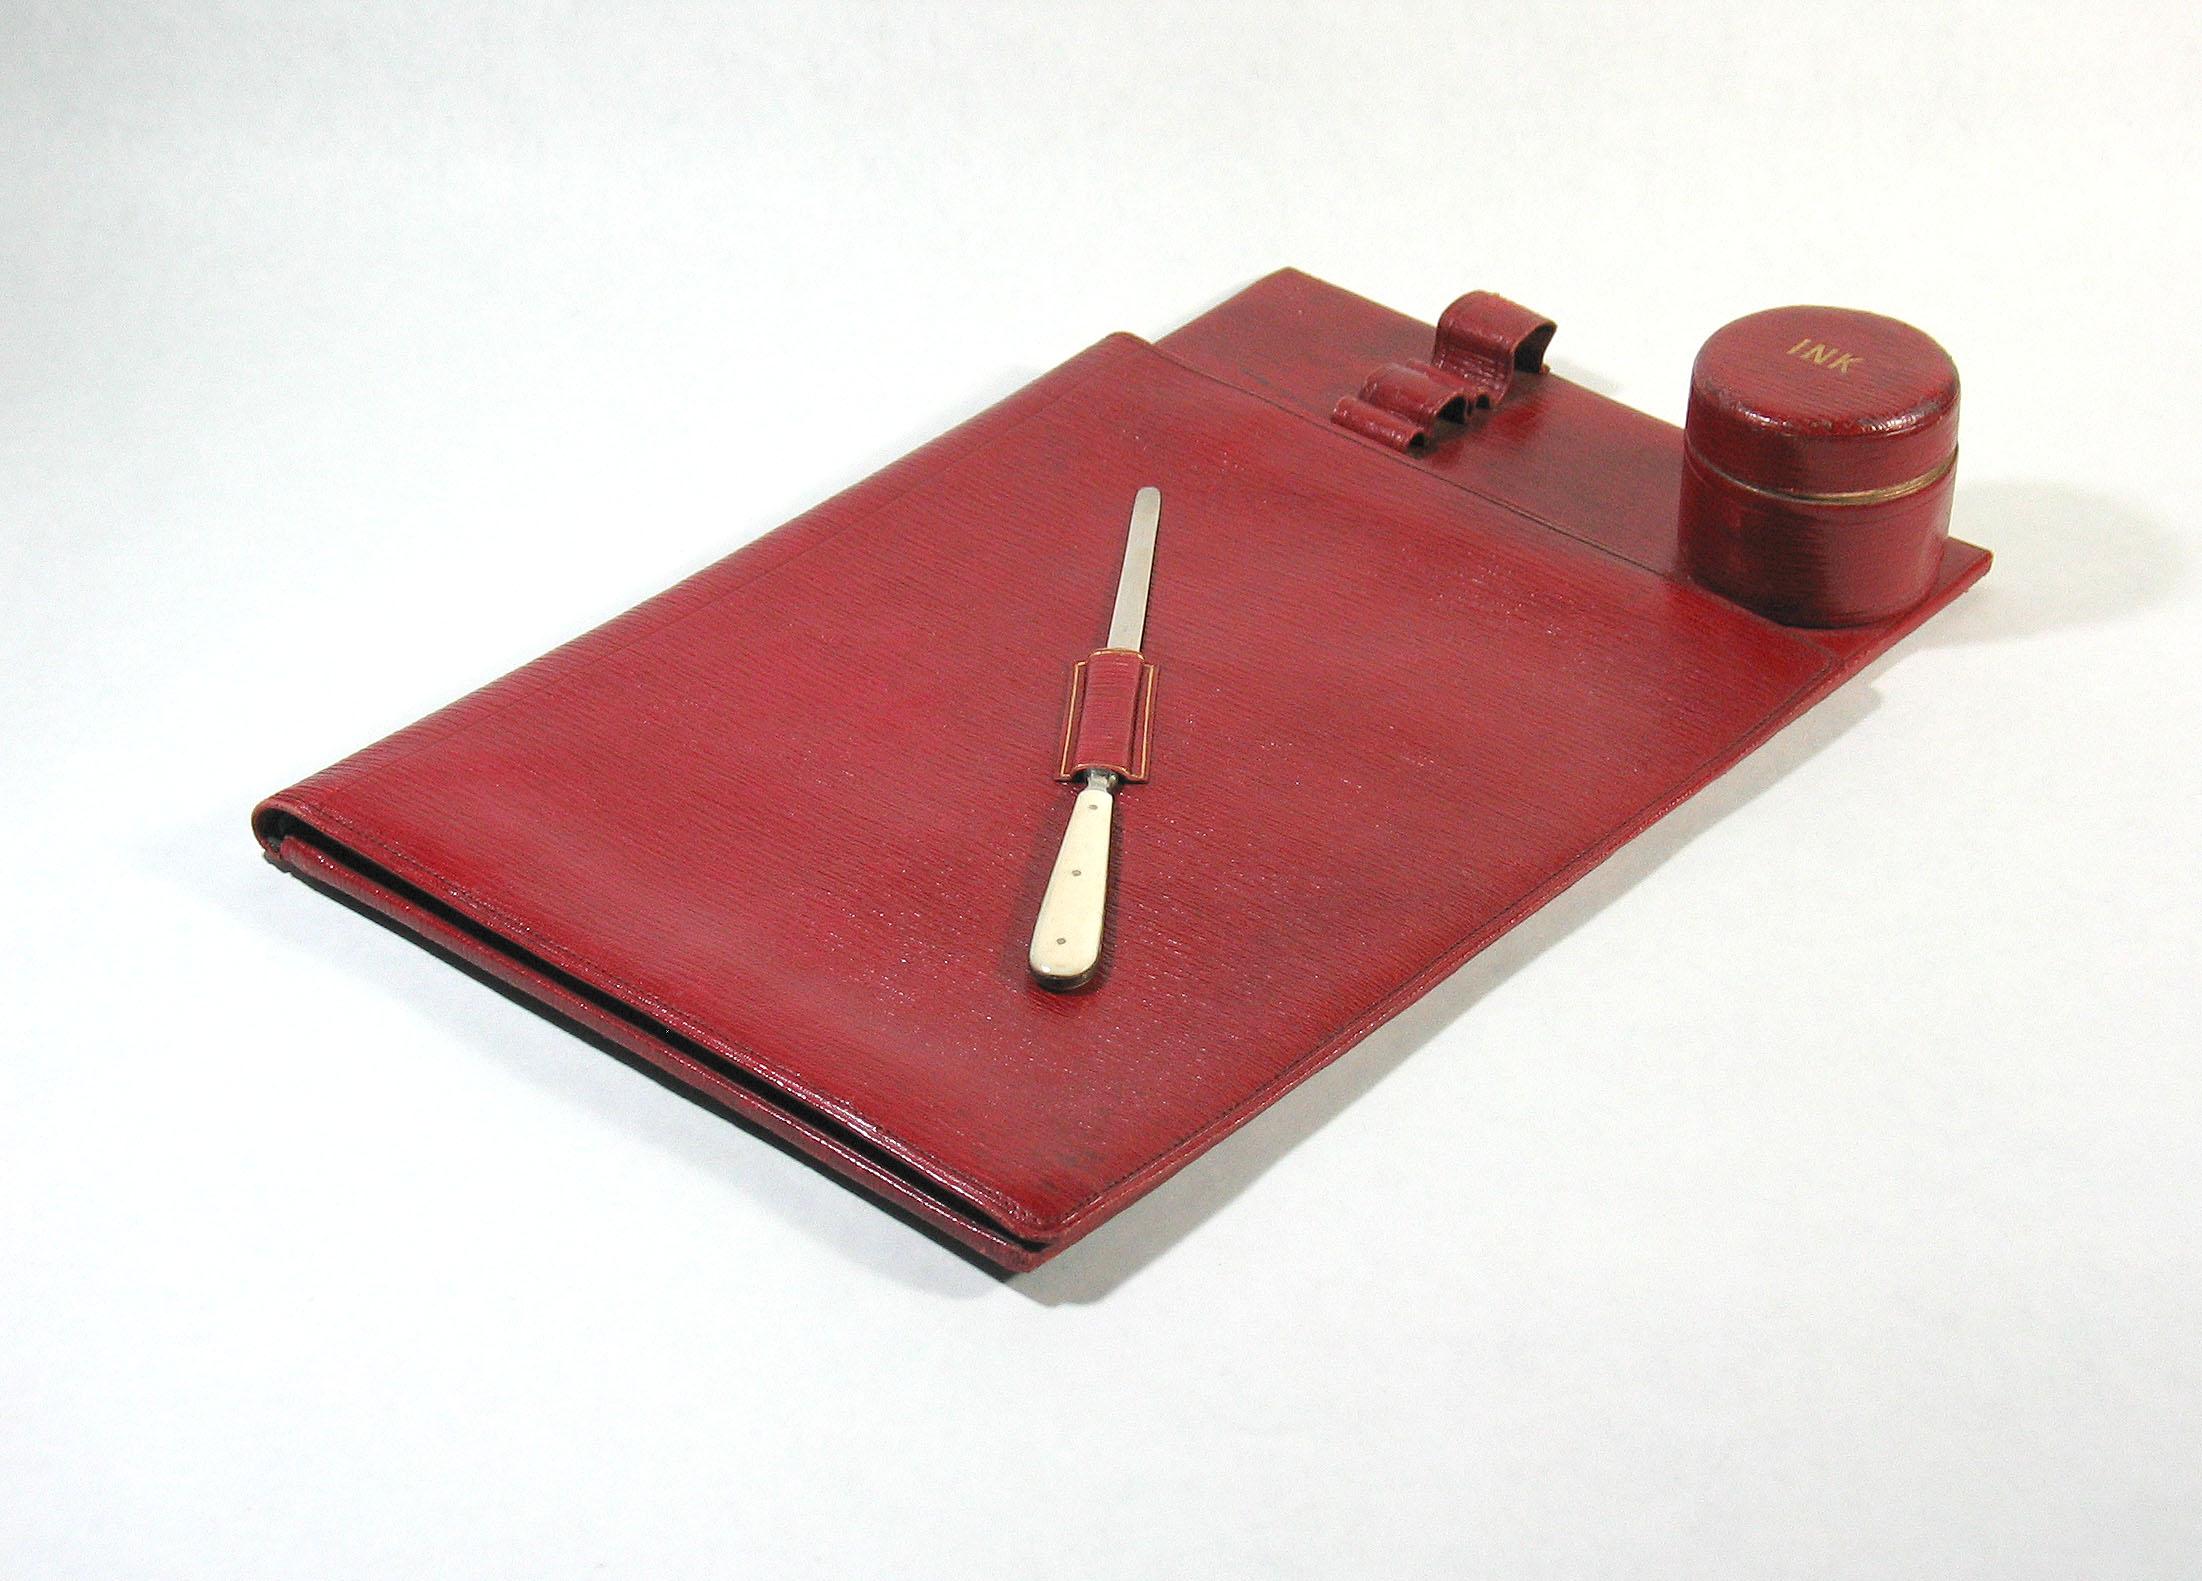 Austrian Antique Victorian Red Morrocan Leather Desk or Travelling Blotter with Inkwell